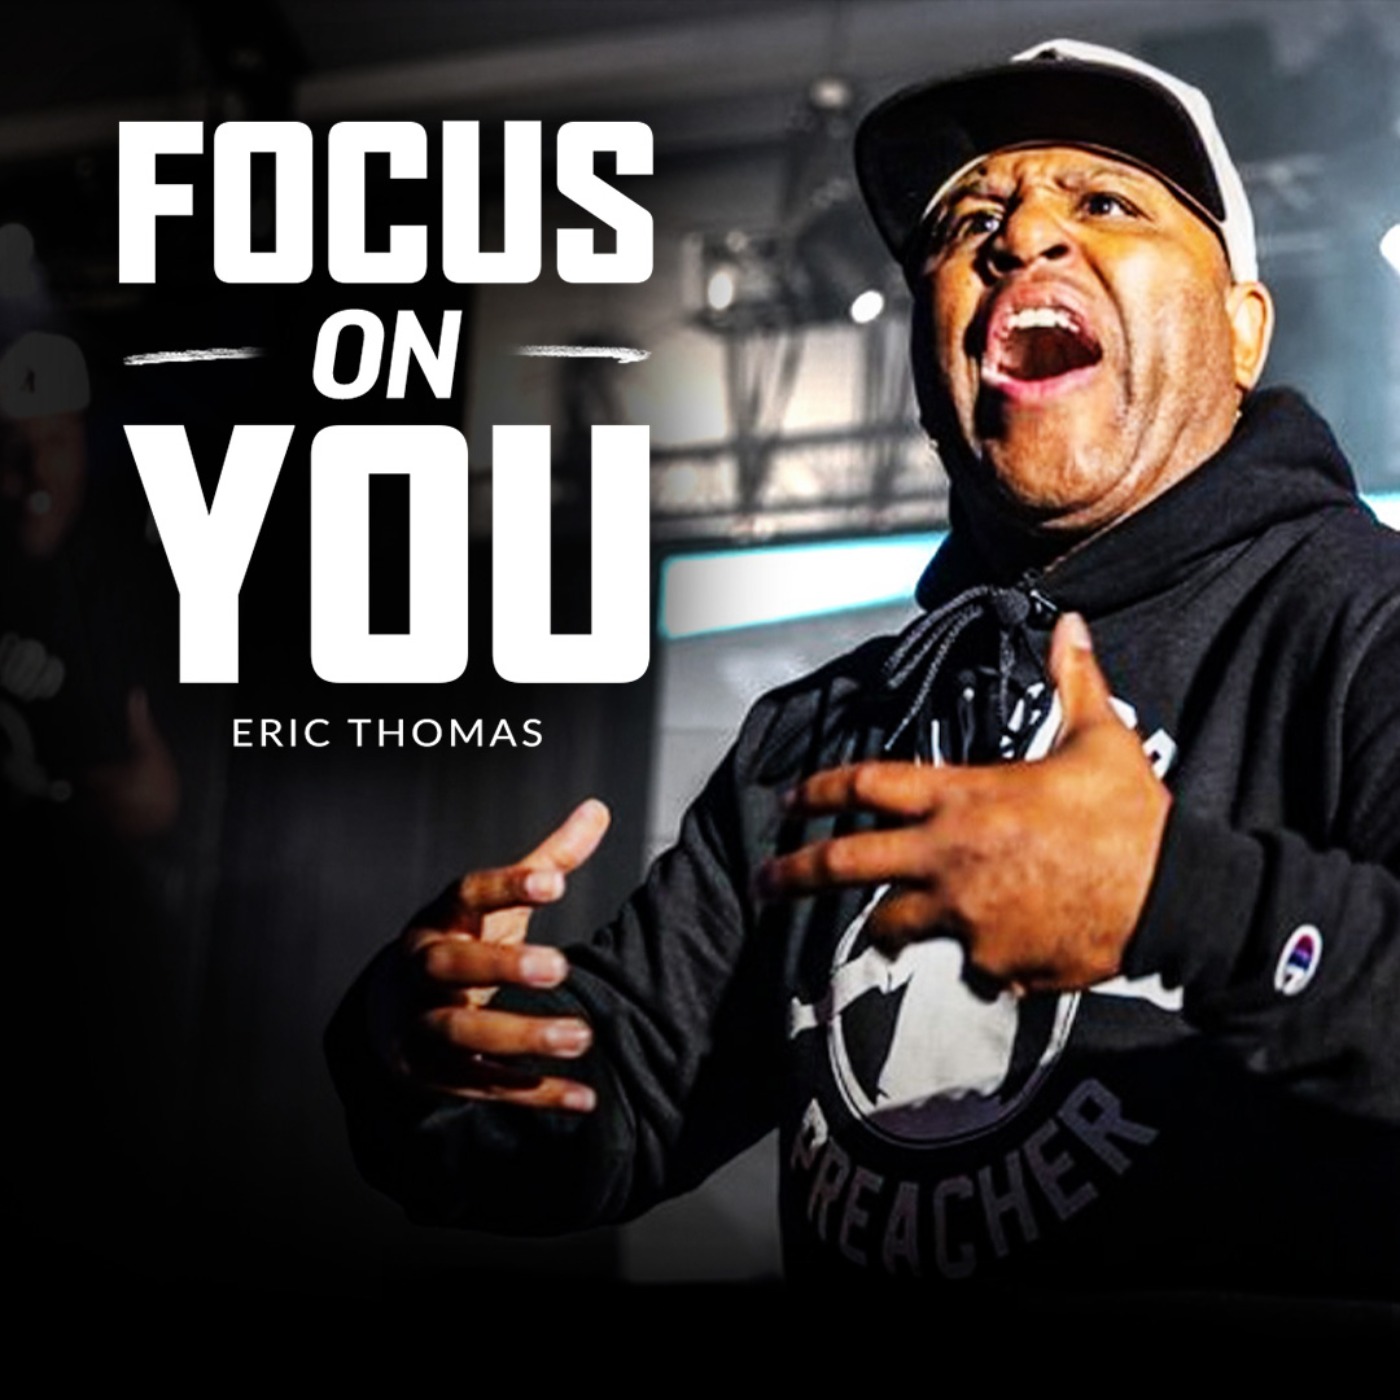 YOU MUST BE OBSESSED - Best Motivational Speech (Featuring Eric Thomas)